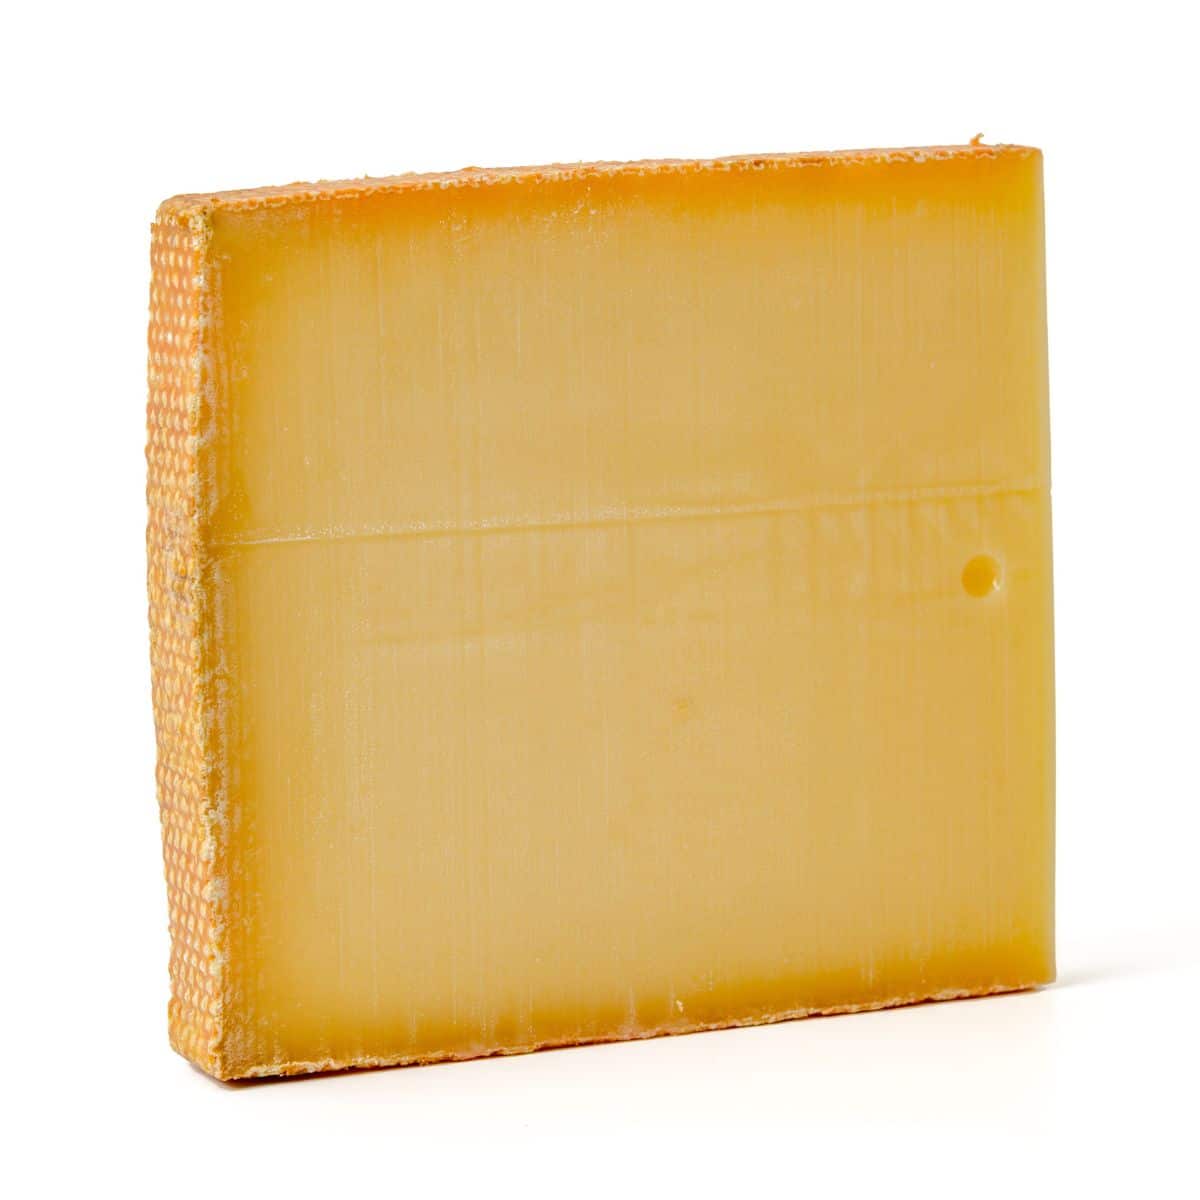 Le brouere cheese on a white background.